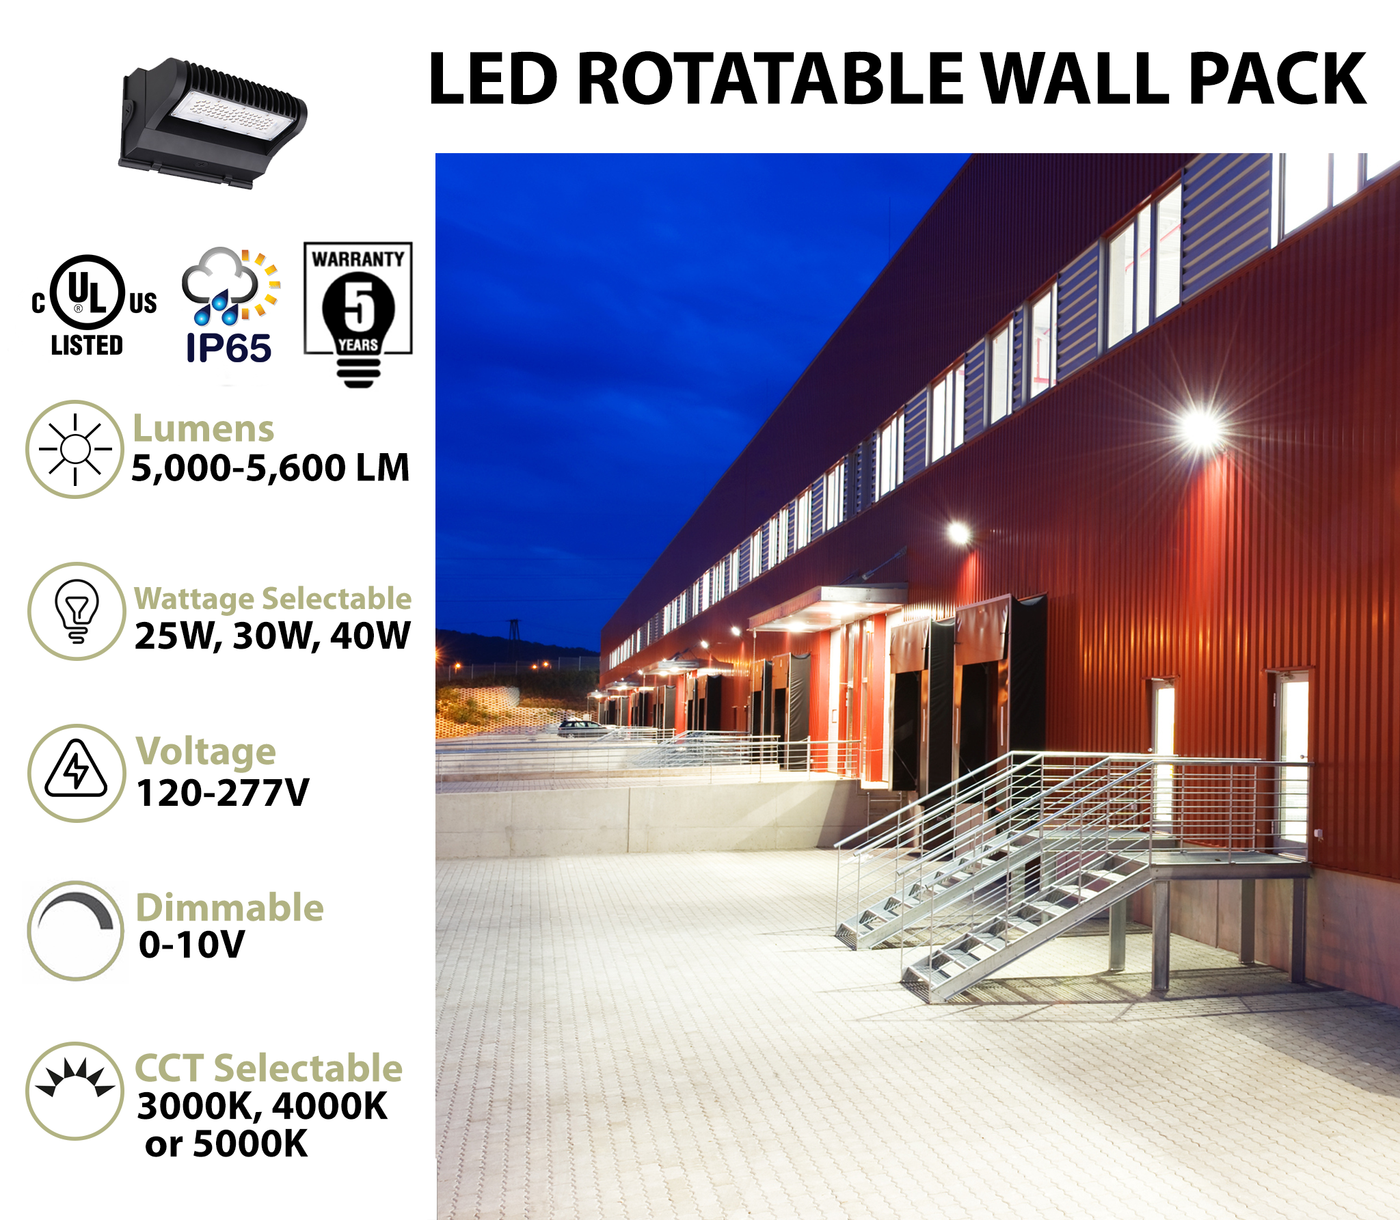 LED Adjustable Wall Pack, 5600 Lumen Max, Wattage and CCT Selectable, Integrated Photocell, 120-277V